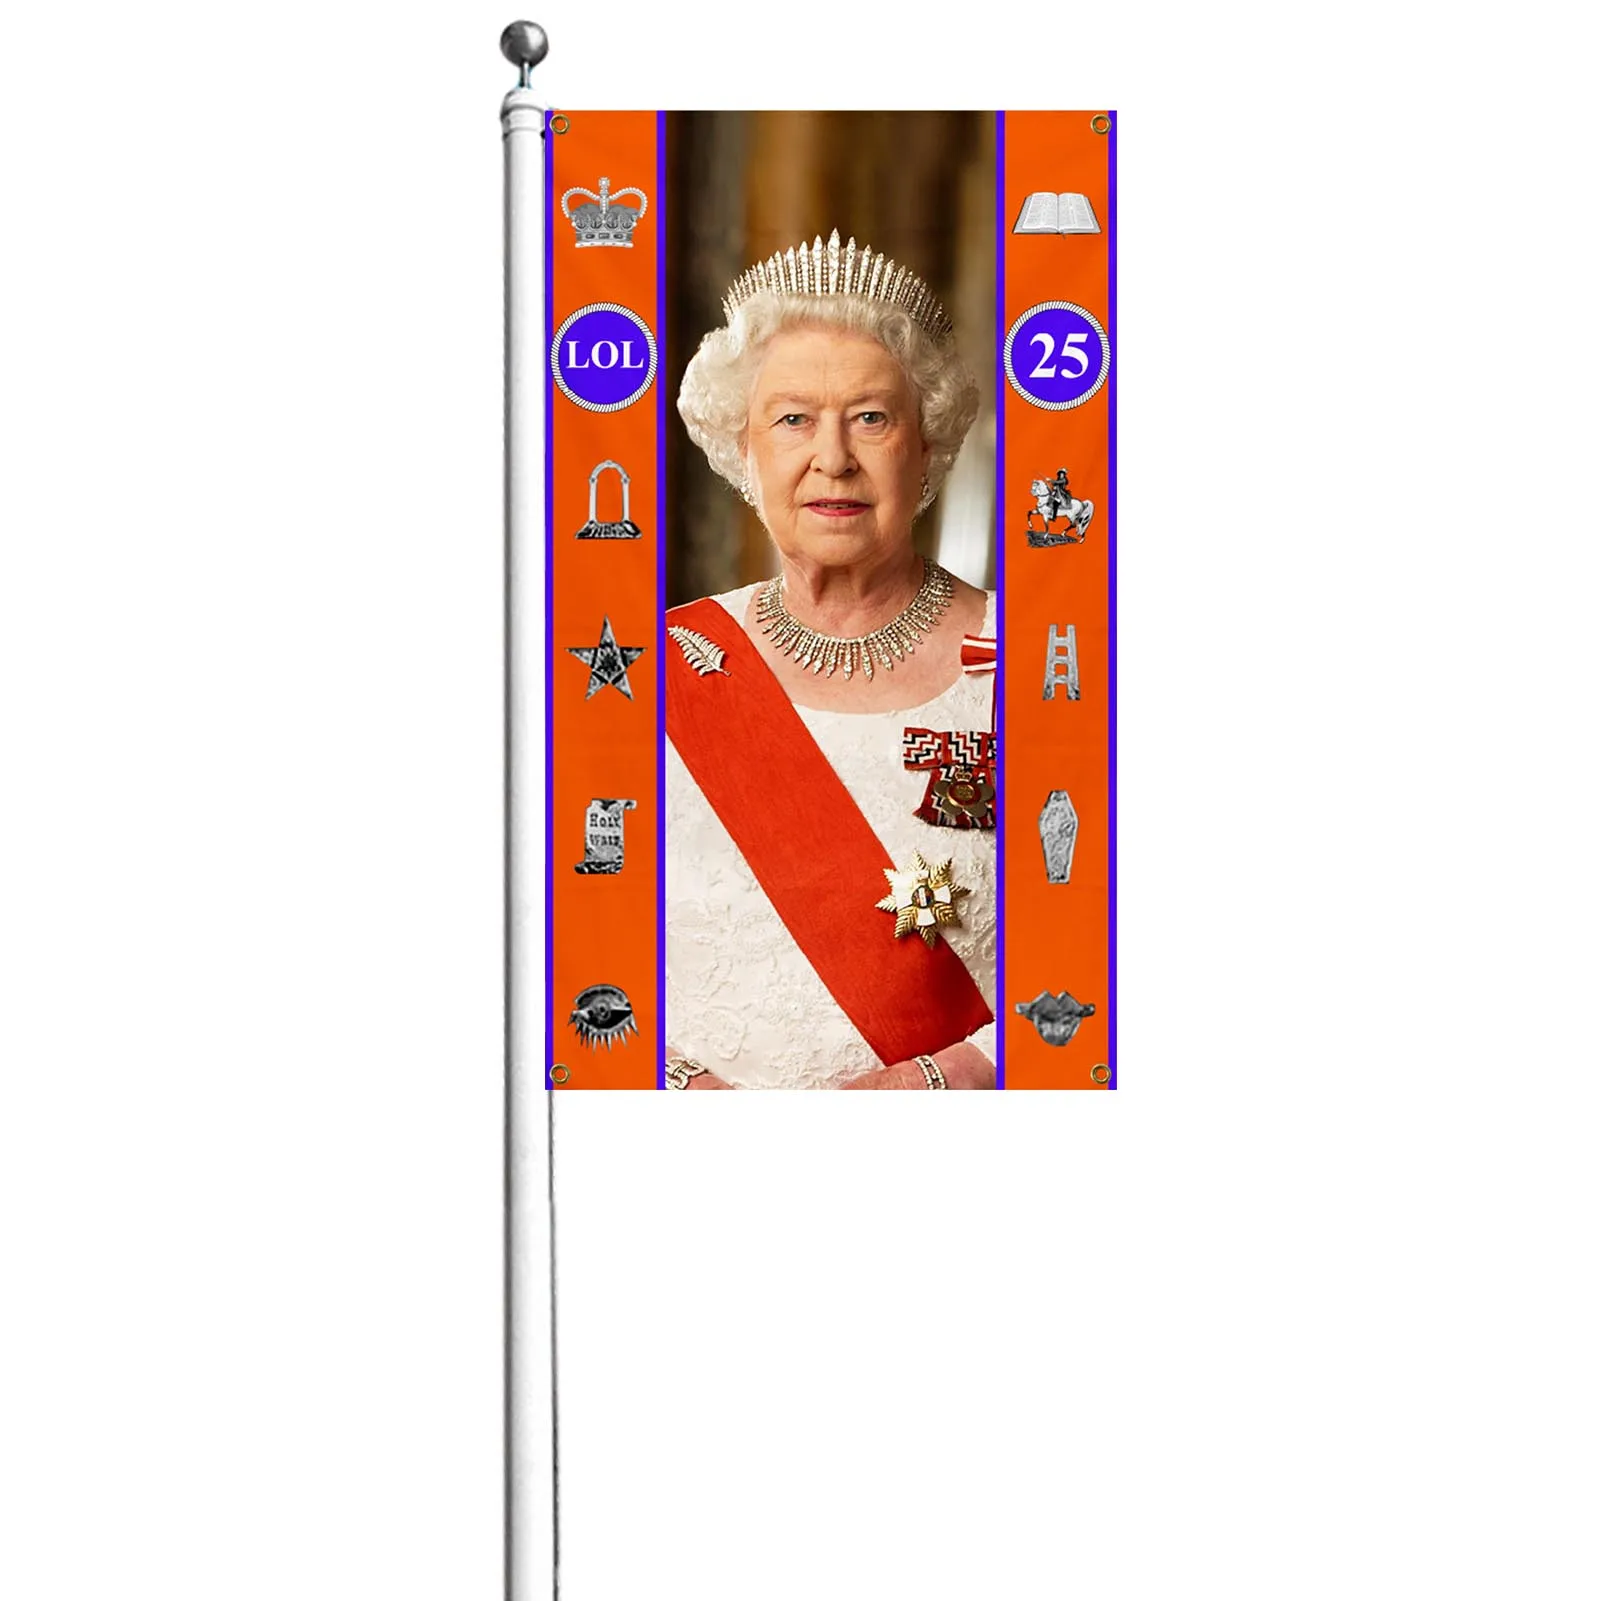 

2022 Union Jack Queens Platinums Jubilee Flag Featuring Her Majesty The Queen 70th Anniversary Celebrating Party Outdoor British